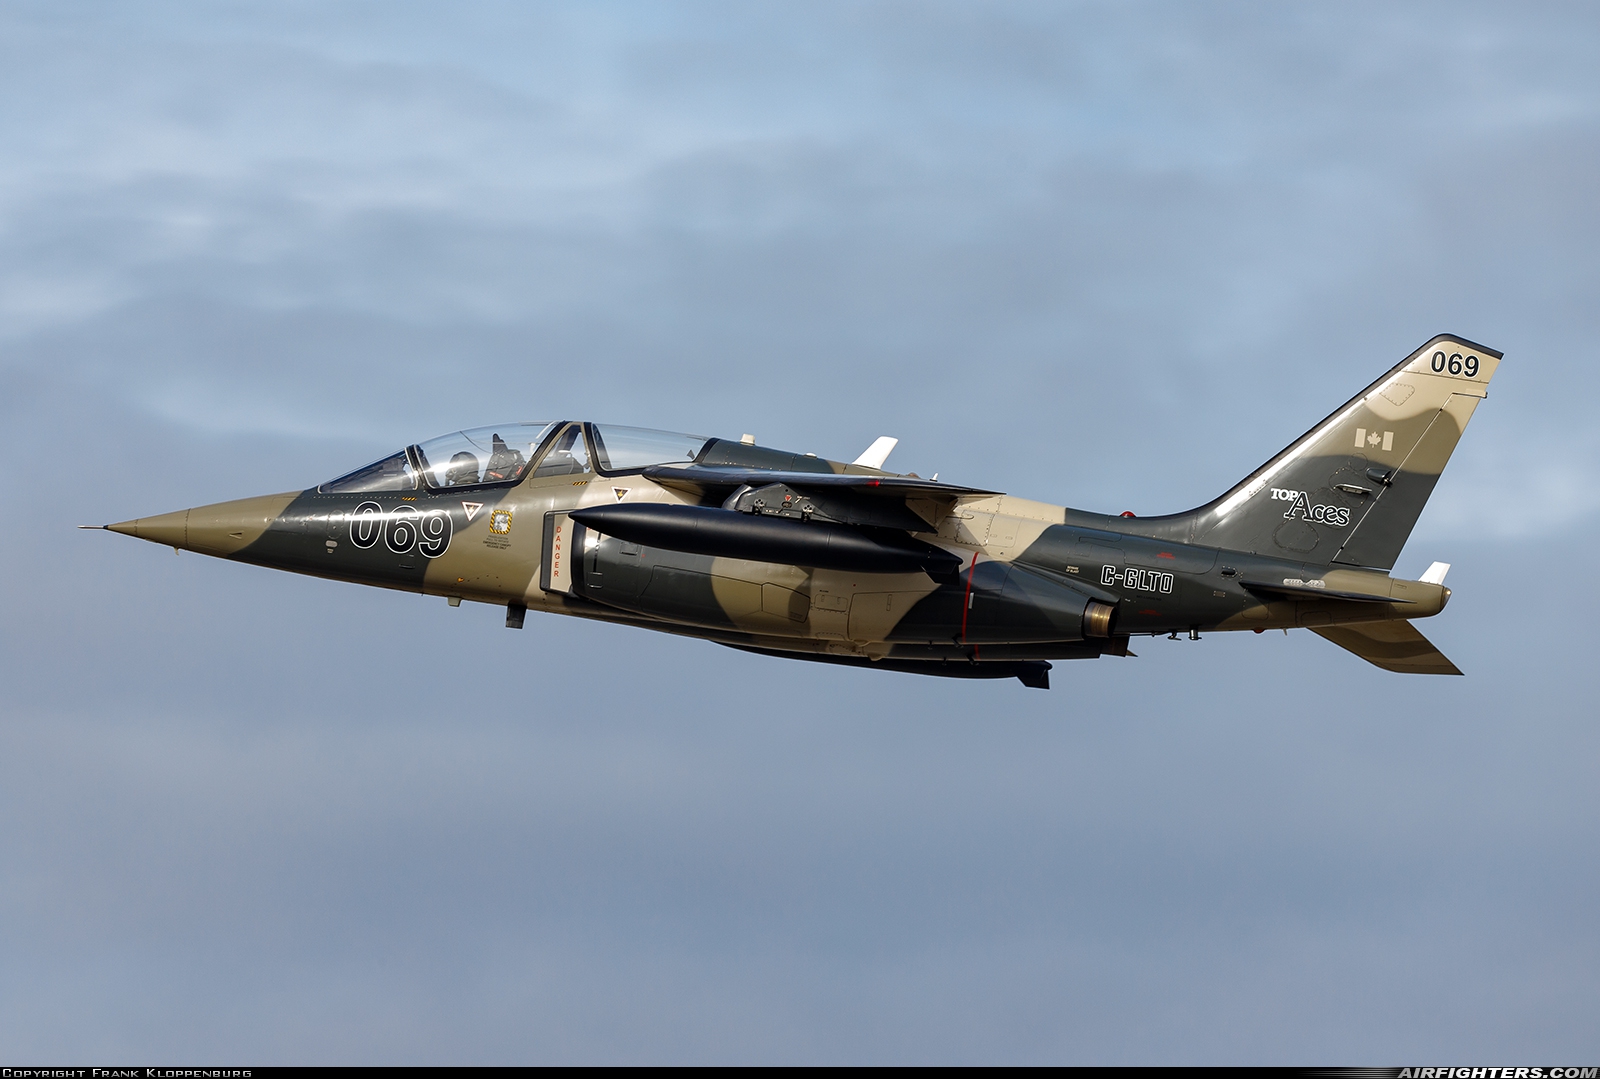 Company Owned - Top Aces (ATSI) Dassault/Dornier Alpha Jet A C-GLTO at Wittmundhafen (Wittmund) (ETNT), Germany